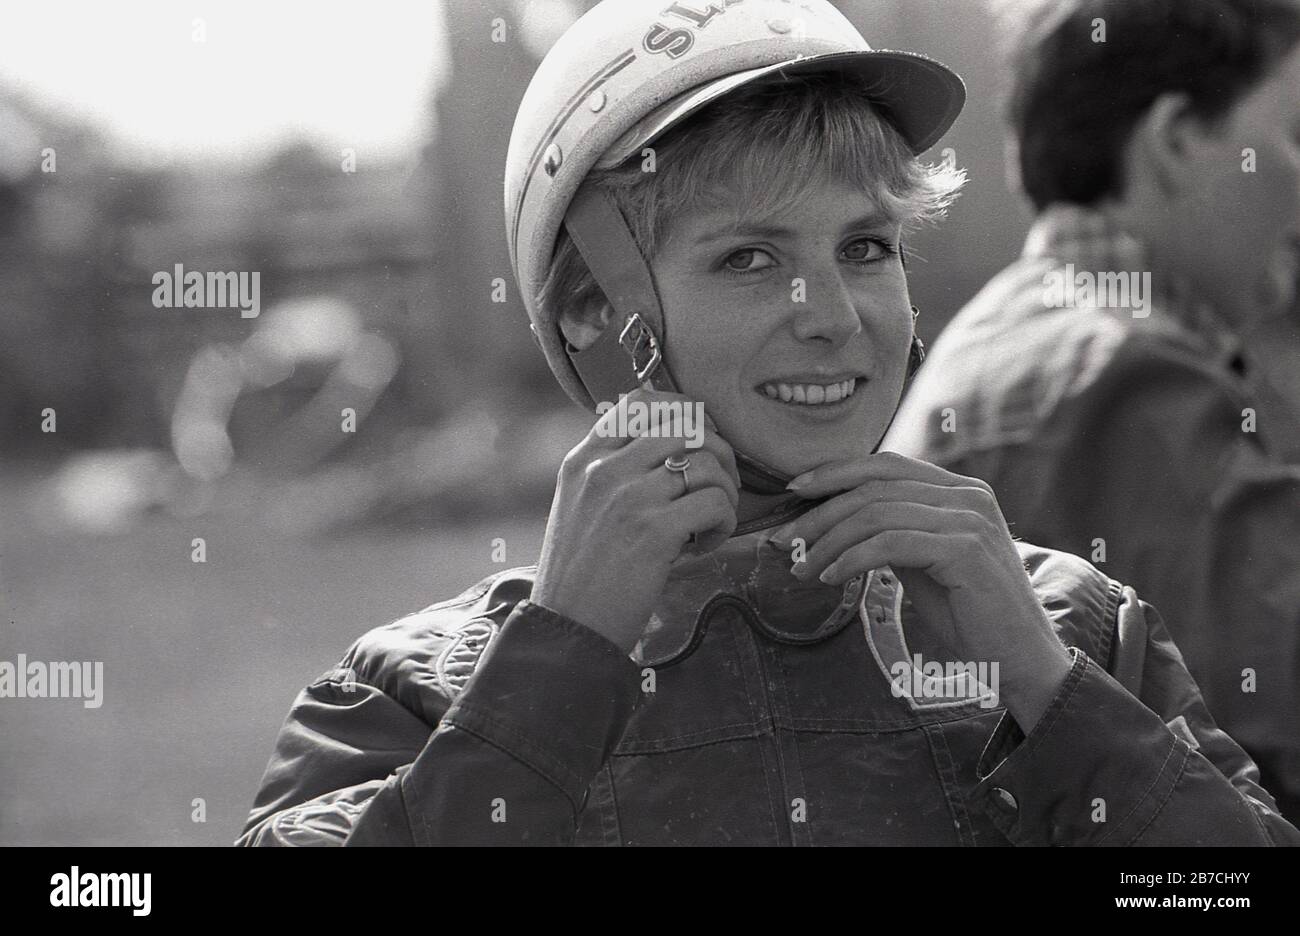 1980s, historical, close-up of a female rider adjusting her hard protective hat before taking part in a harness race, a sport involving steering or riding a horse from a cart, sometimes referred to as a pony and trap, England, UK. Stock Photo